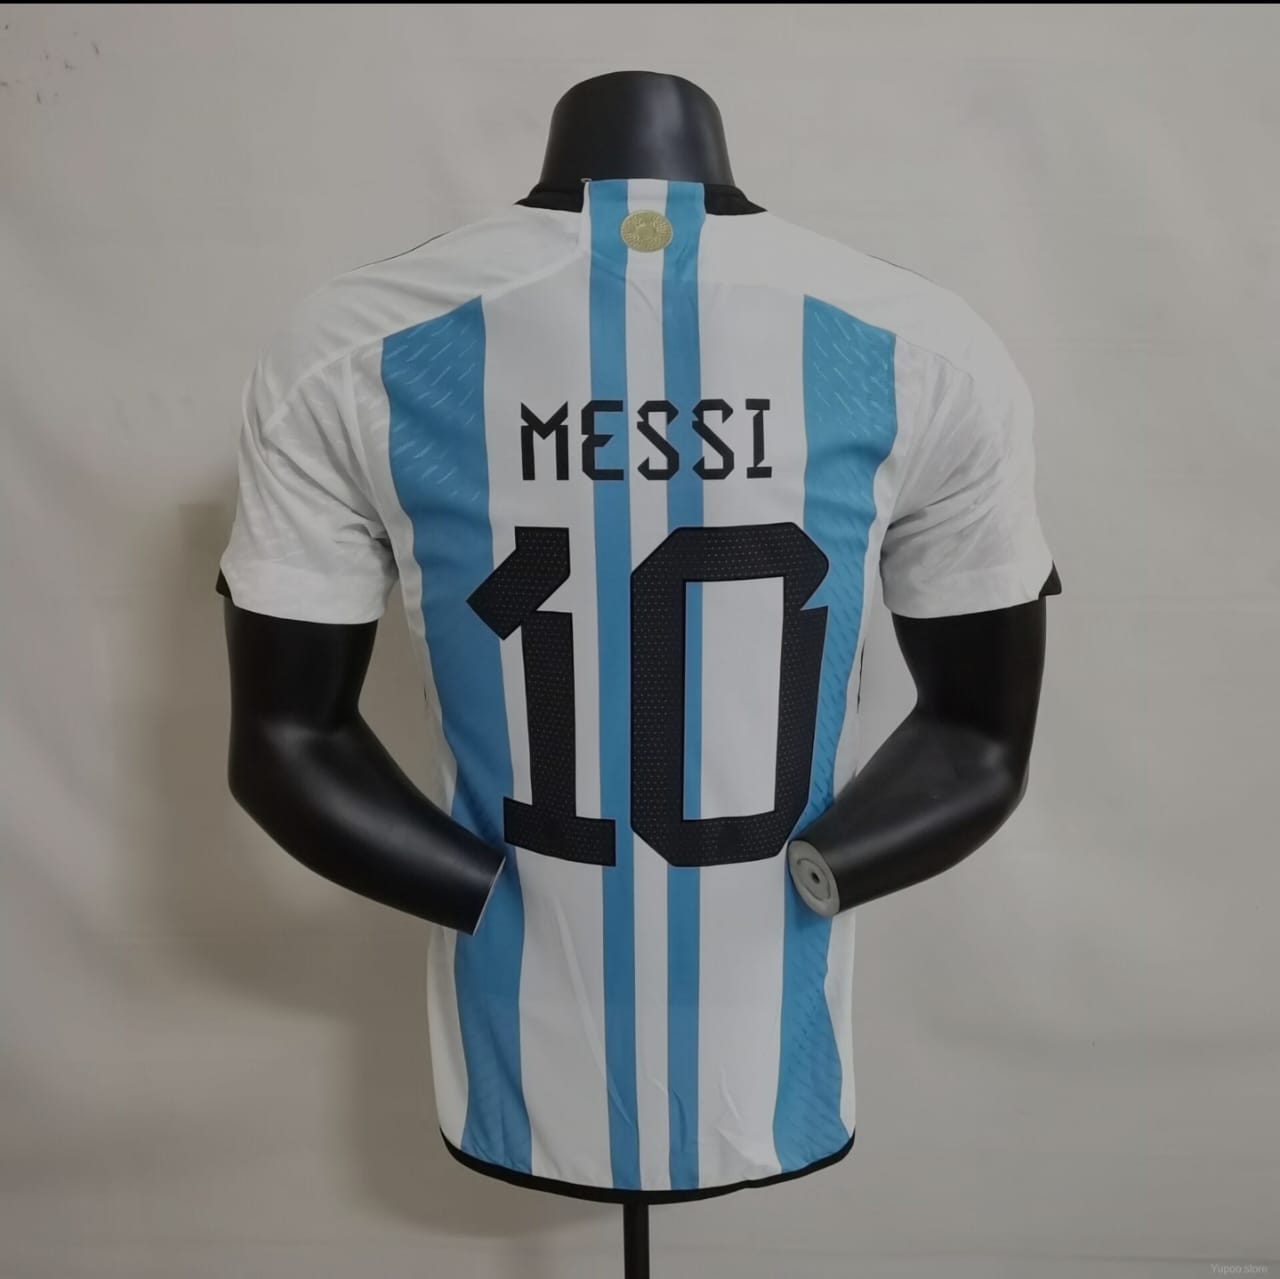 Argentina world cup winner Jersey with 3 star patches